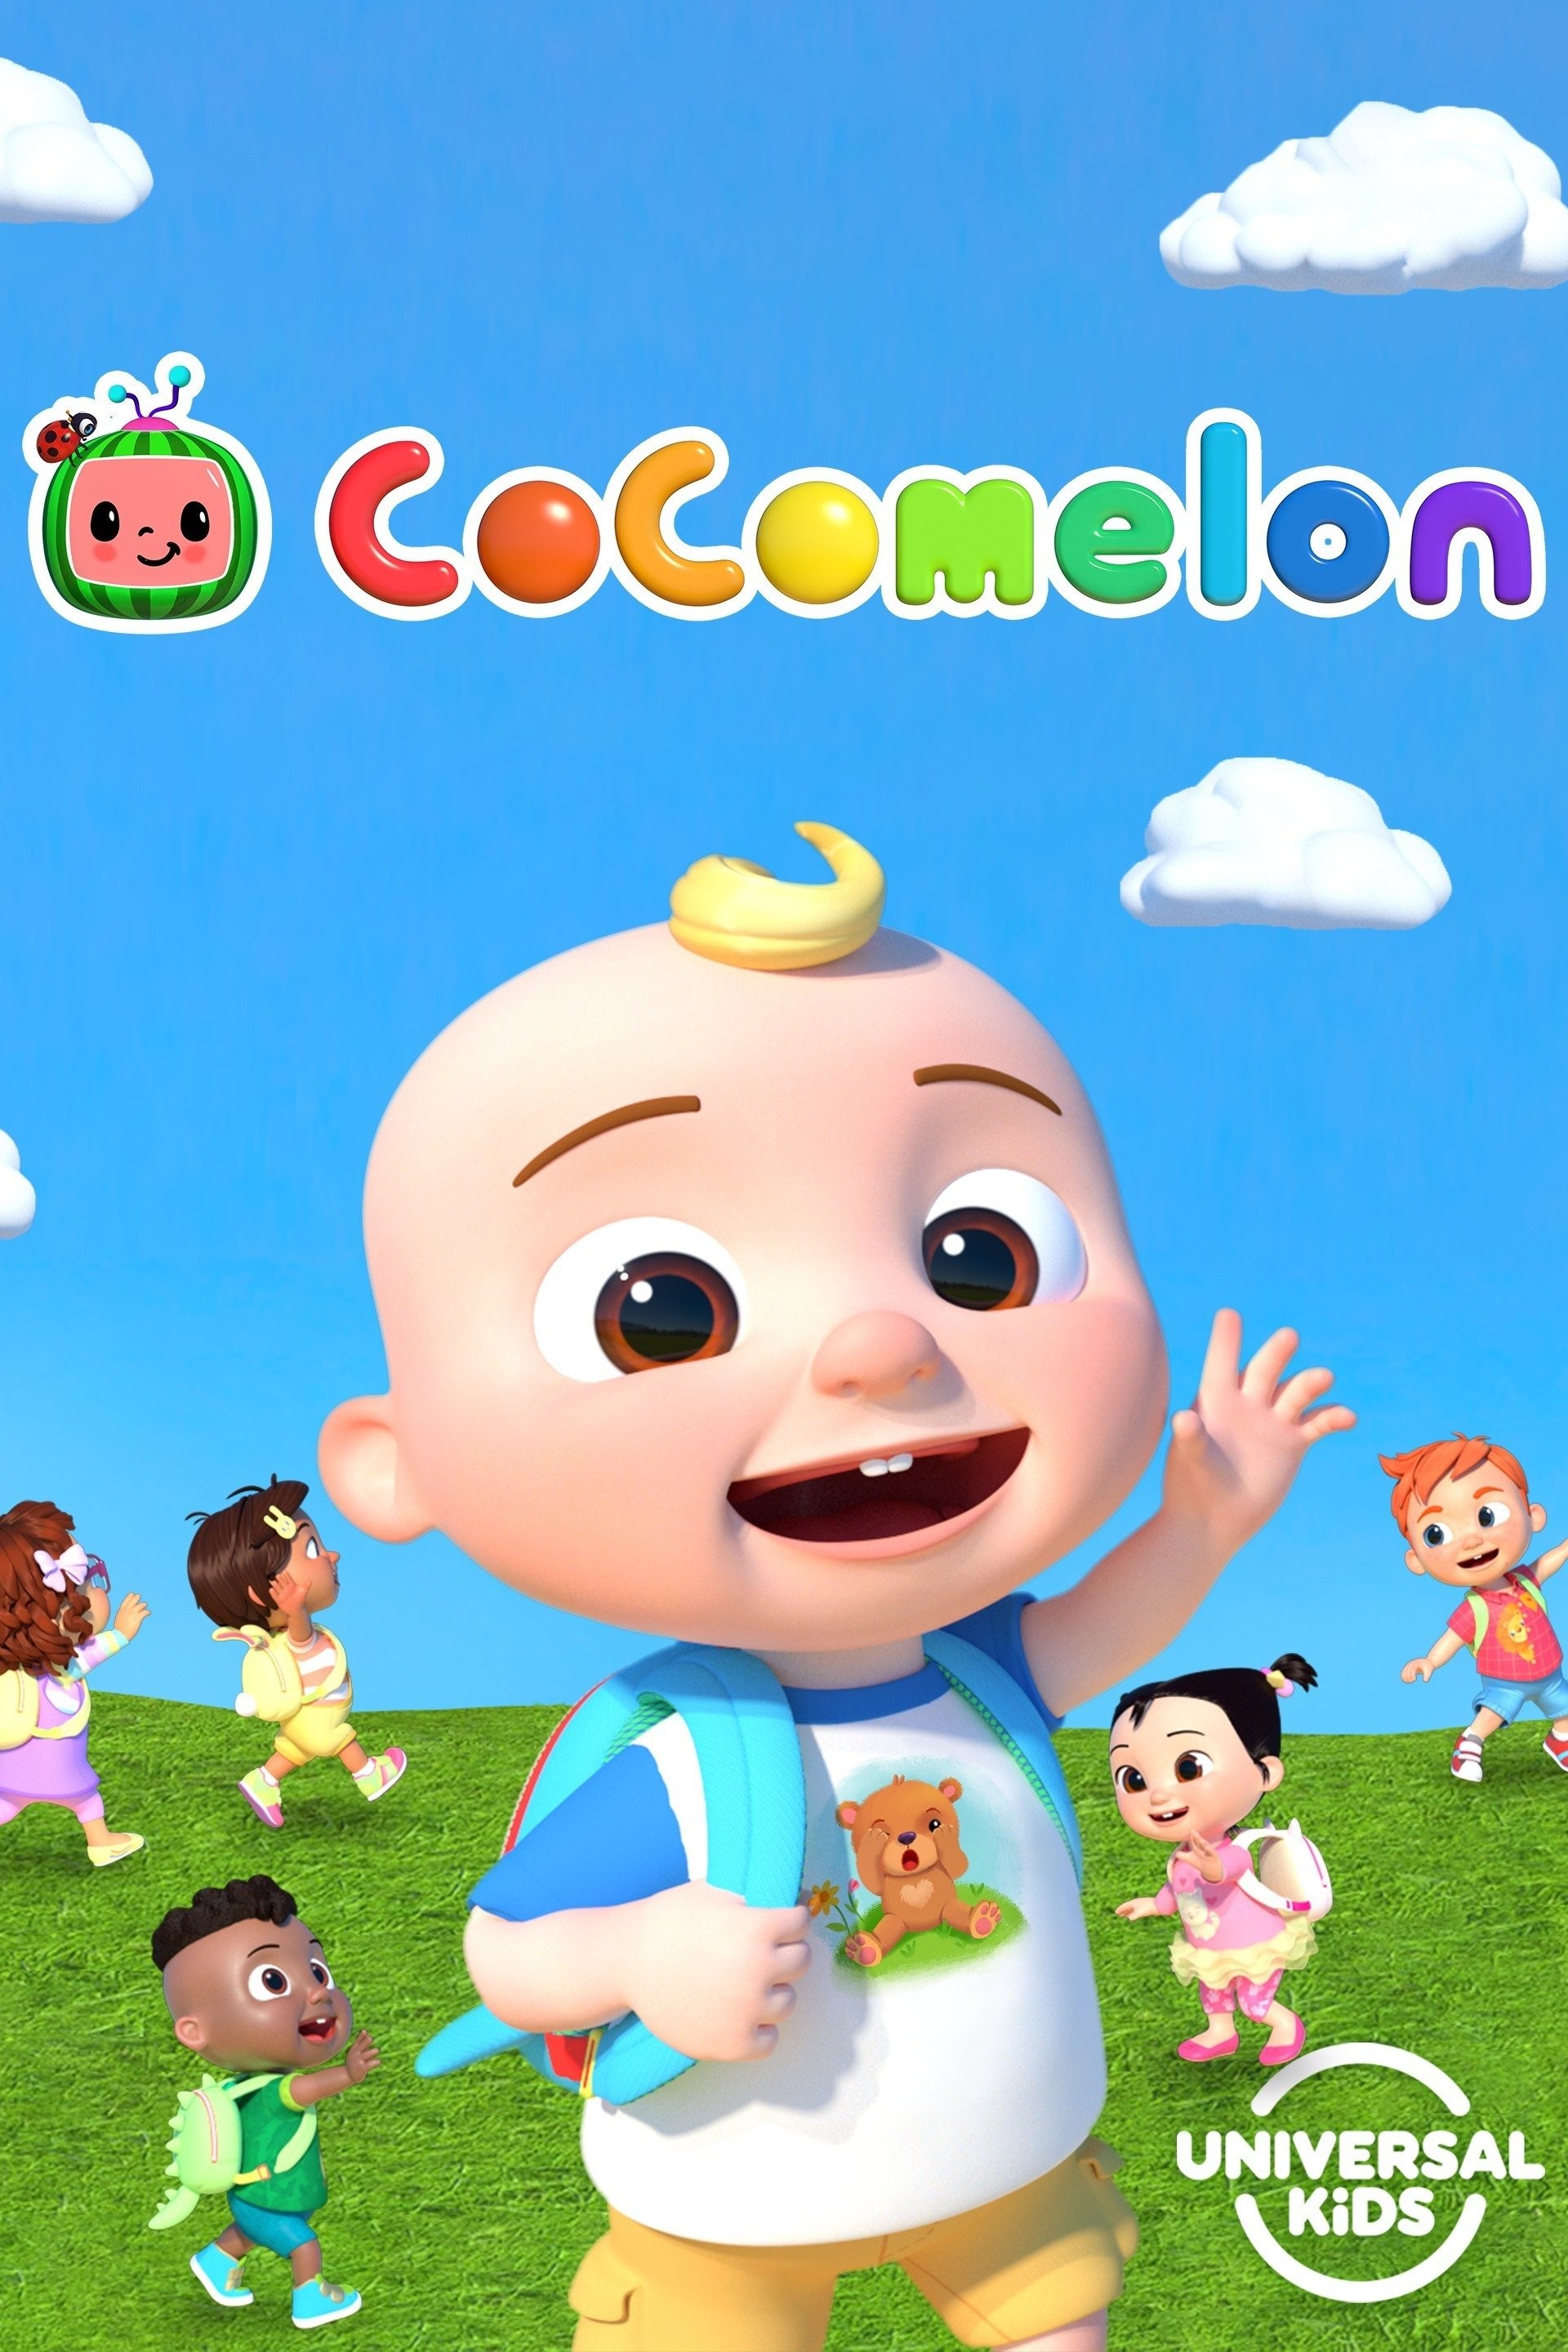 Happy Place Dance Party + More, Cocomelon - Nursery Rhymes